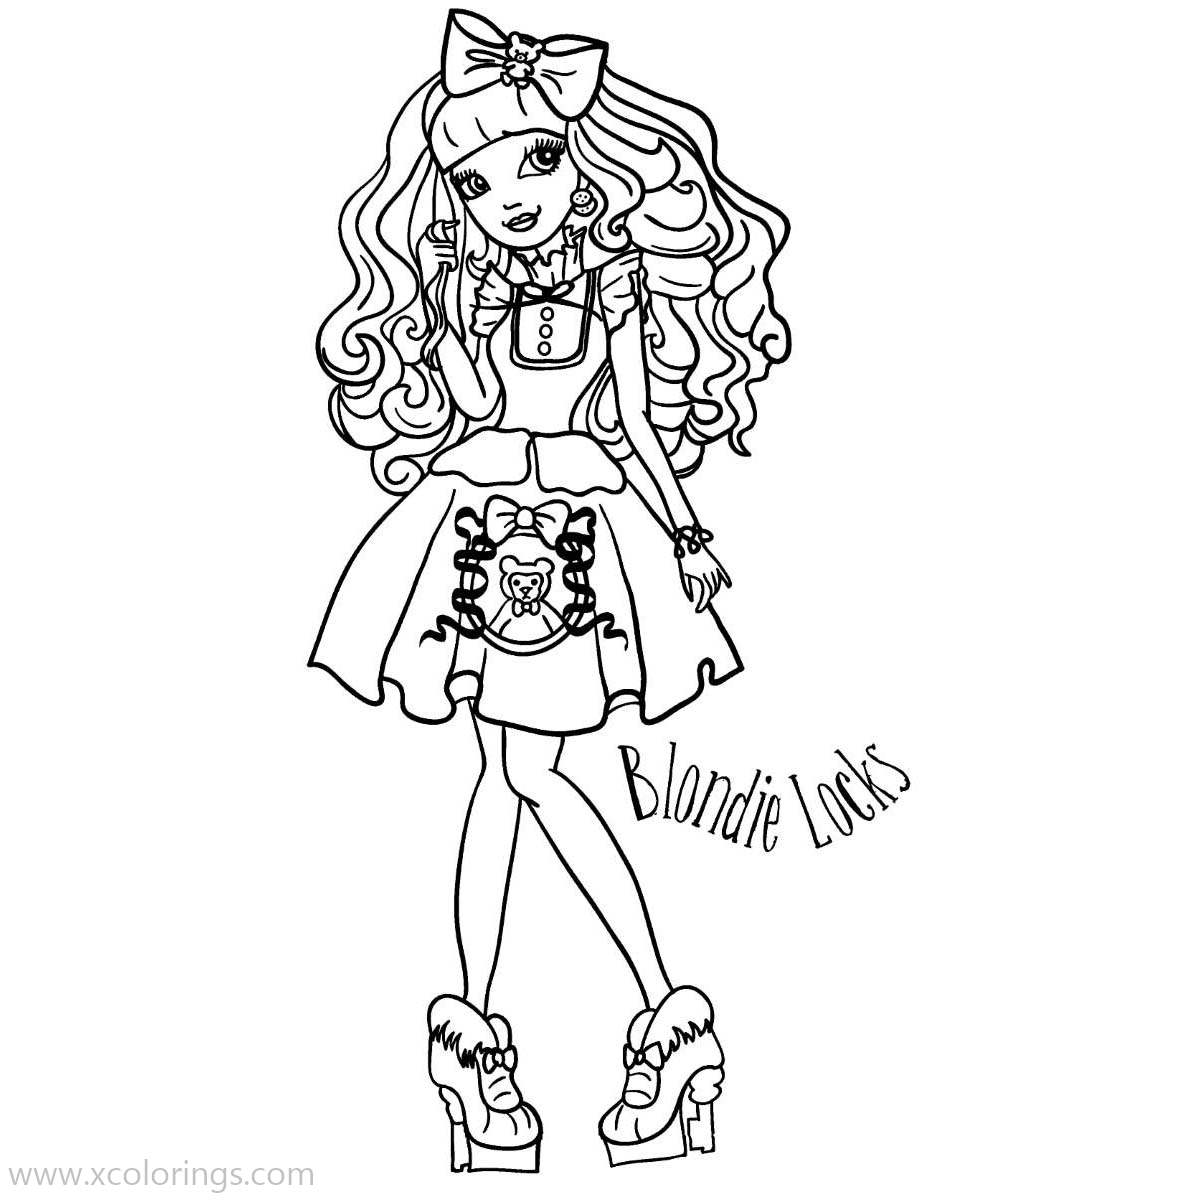 Free Blondie Locks from Ever After High Coloring Pages printable